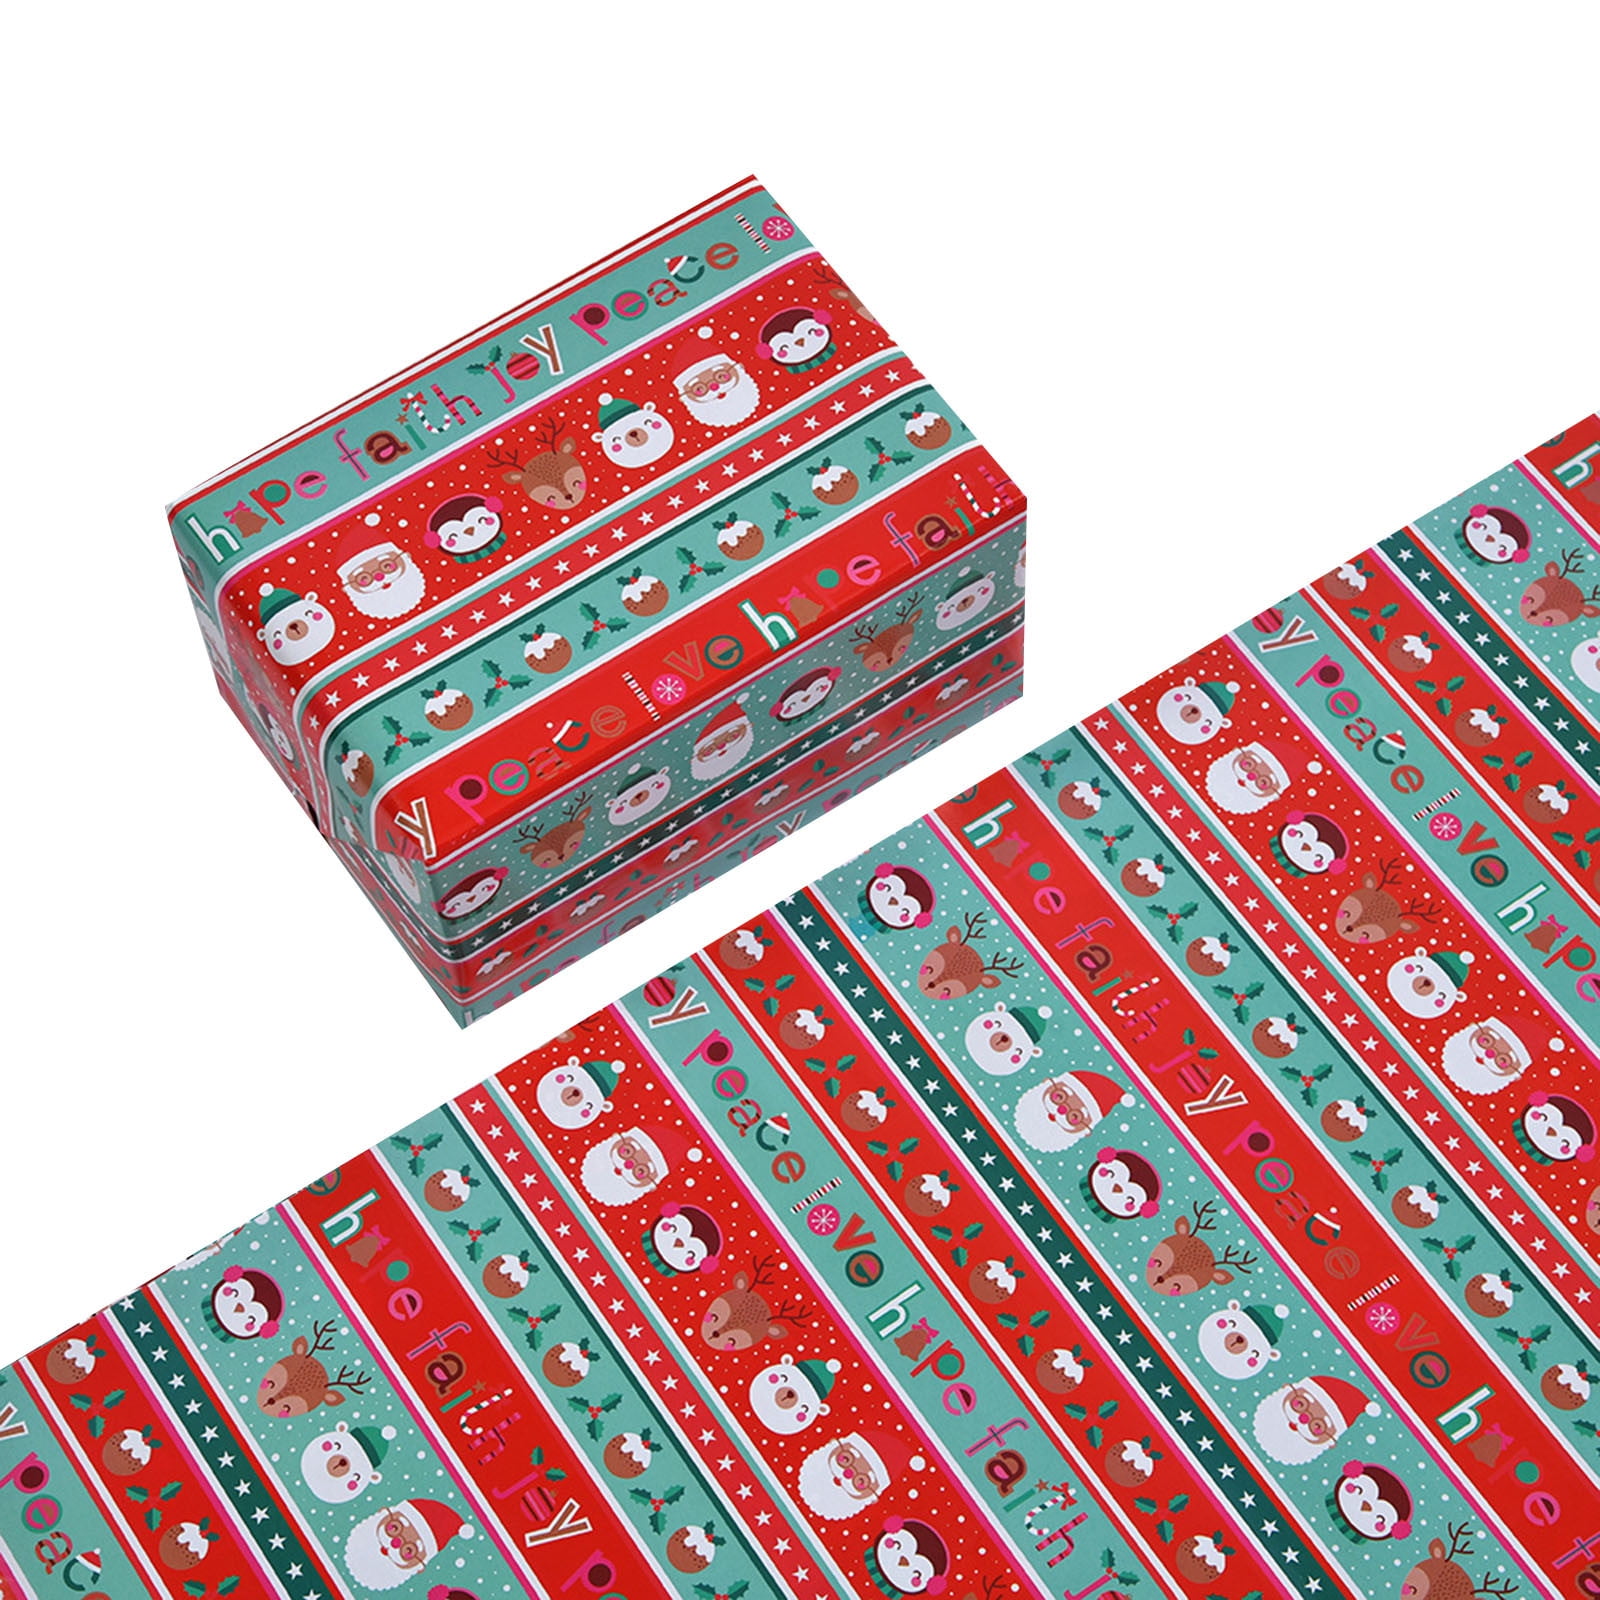 Dtydtpe valentines day decor 1PC DIY Men's Women's Children's Christmas  Wrapping Paper Holiday Gifts Wrapping Truck Plaid Snowflake Green Tree